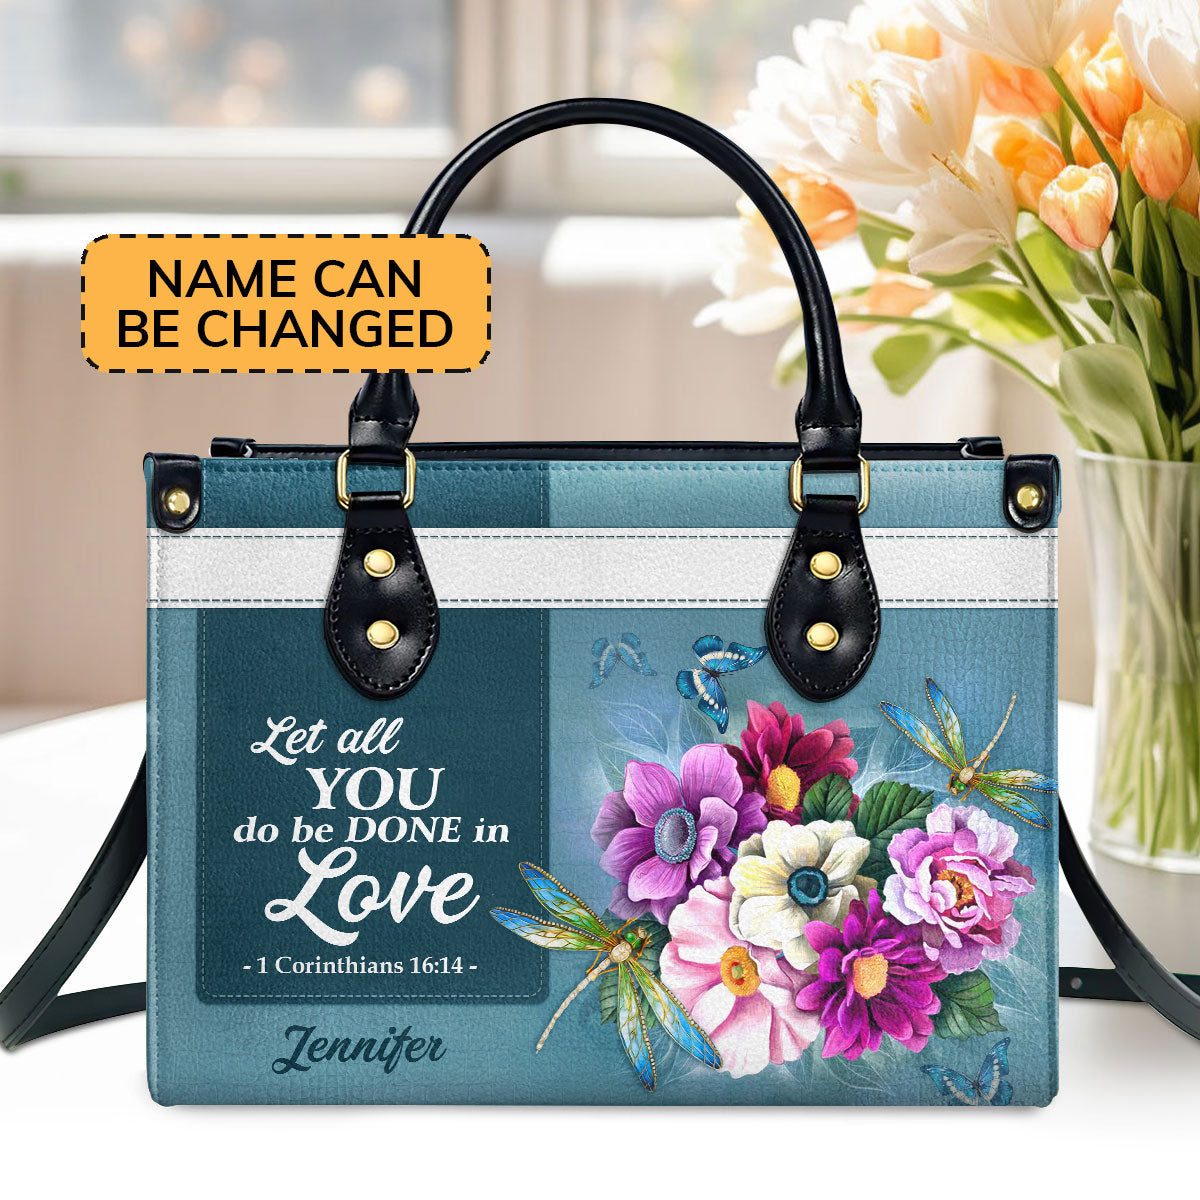 Jesuspirit | 1 Corinthians 16:14 | Let All That You Do Be Done In Love | Christian Valentines Day Ideas For Women | Personalized Leather Handbag With Handle LHBH829